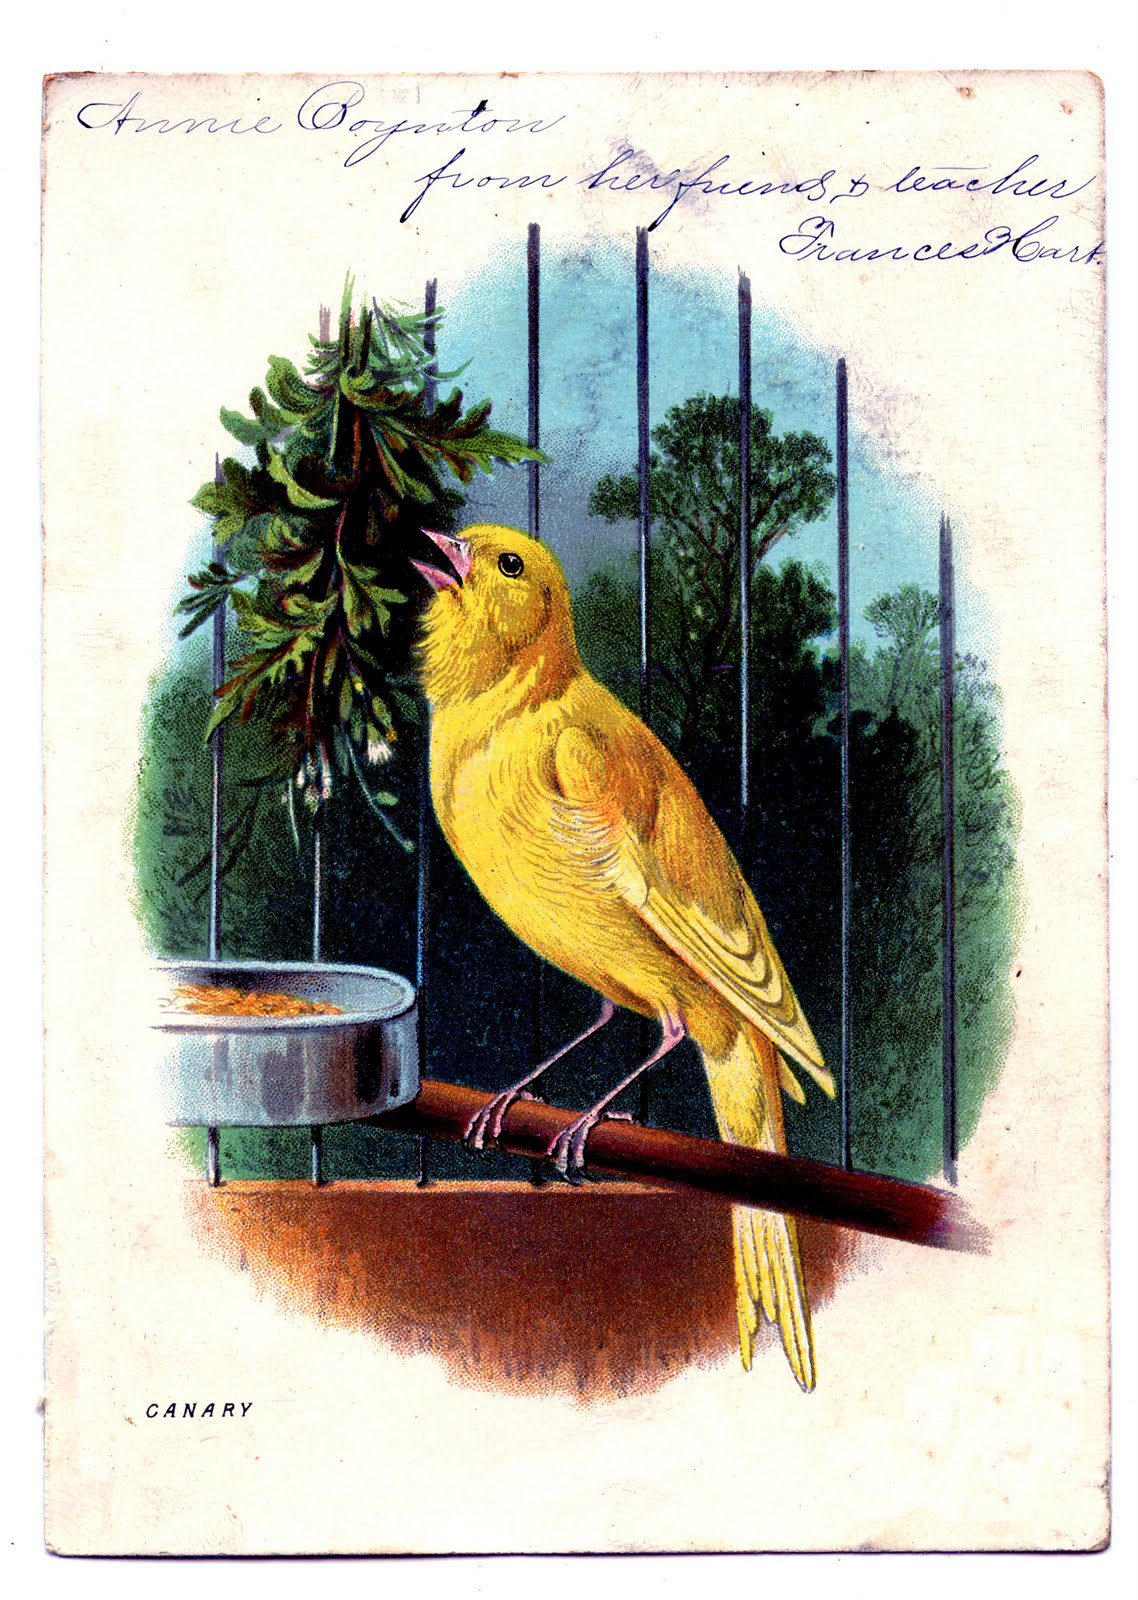 A yellow bird in a cage